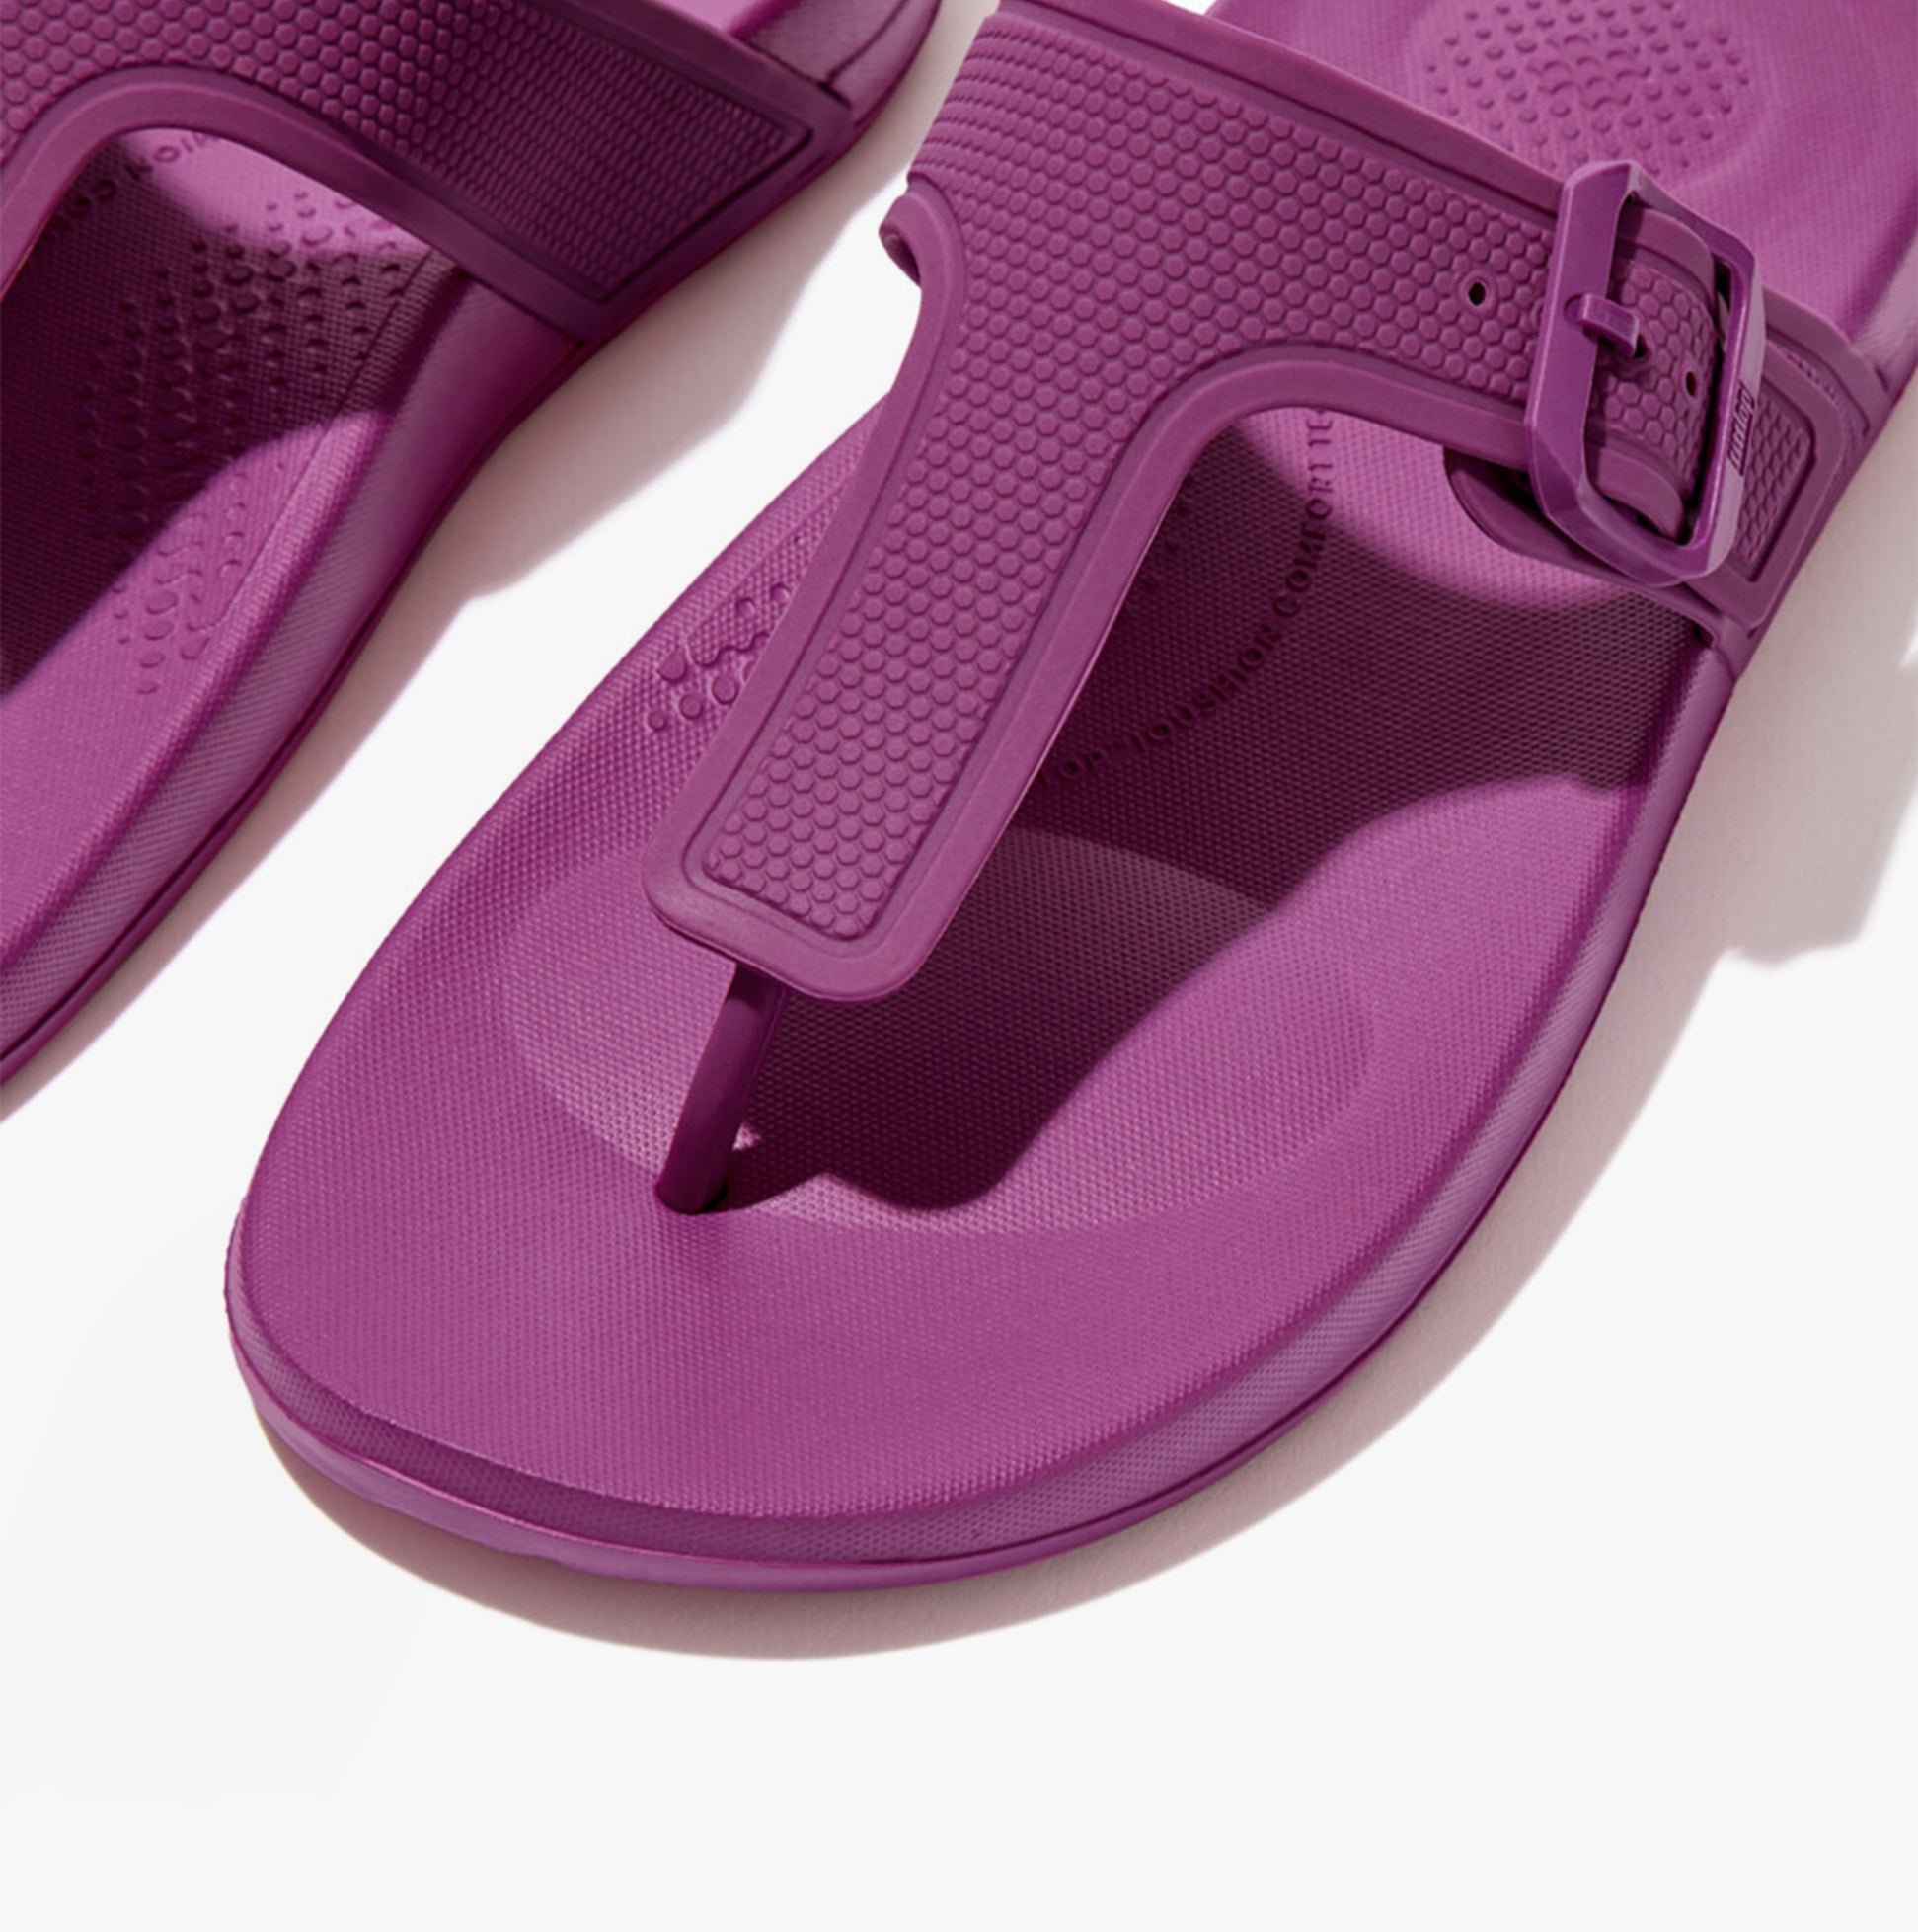 FitFlop-[GB3-A29]-MiamiViolet-2.jpg